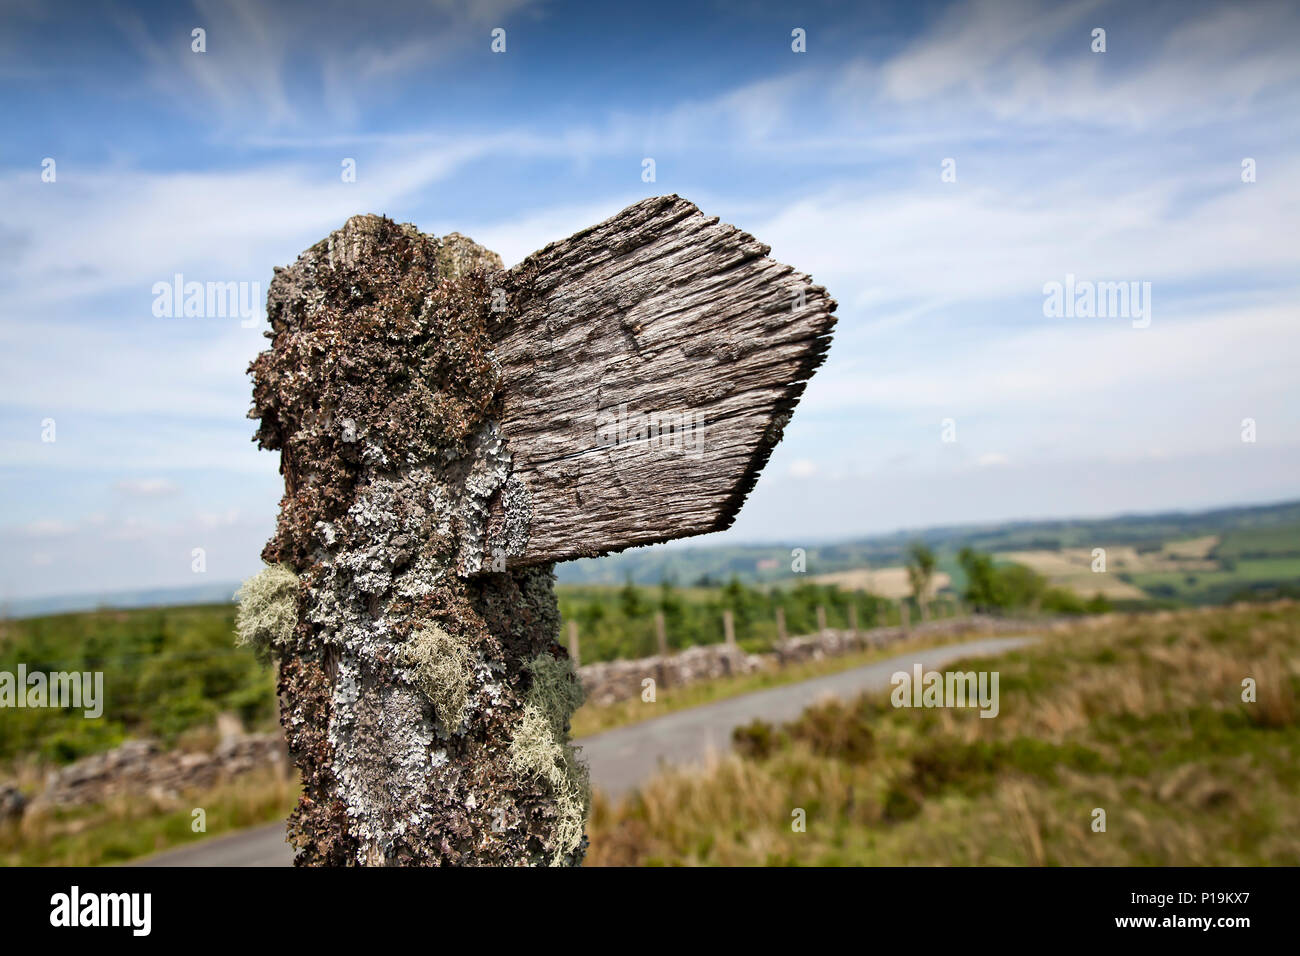 Old wooden bridleway sign covered in moss and lichen in the Brecon Beacons National Park, Wales, UK Stock Photo